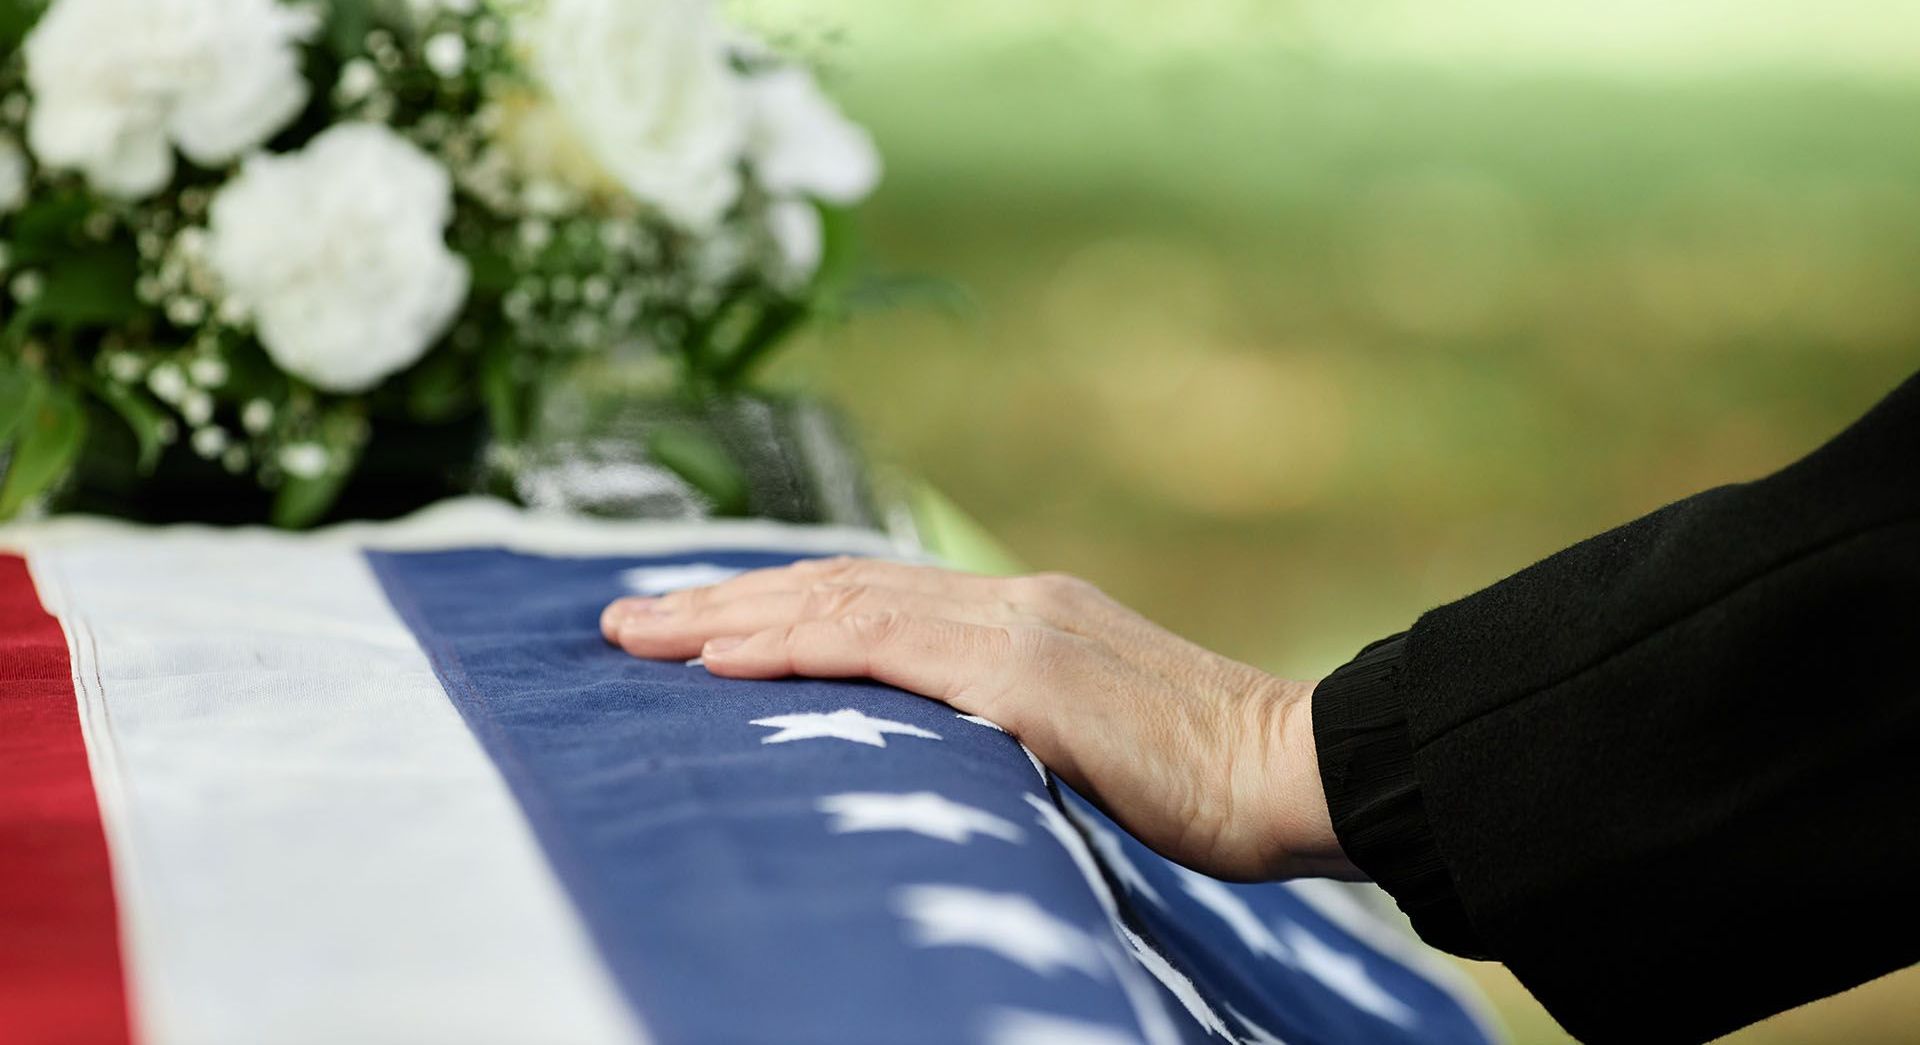 Veteran's Funeral Services in Gatesville, TX offered at Scott's Funeral Home